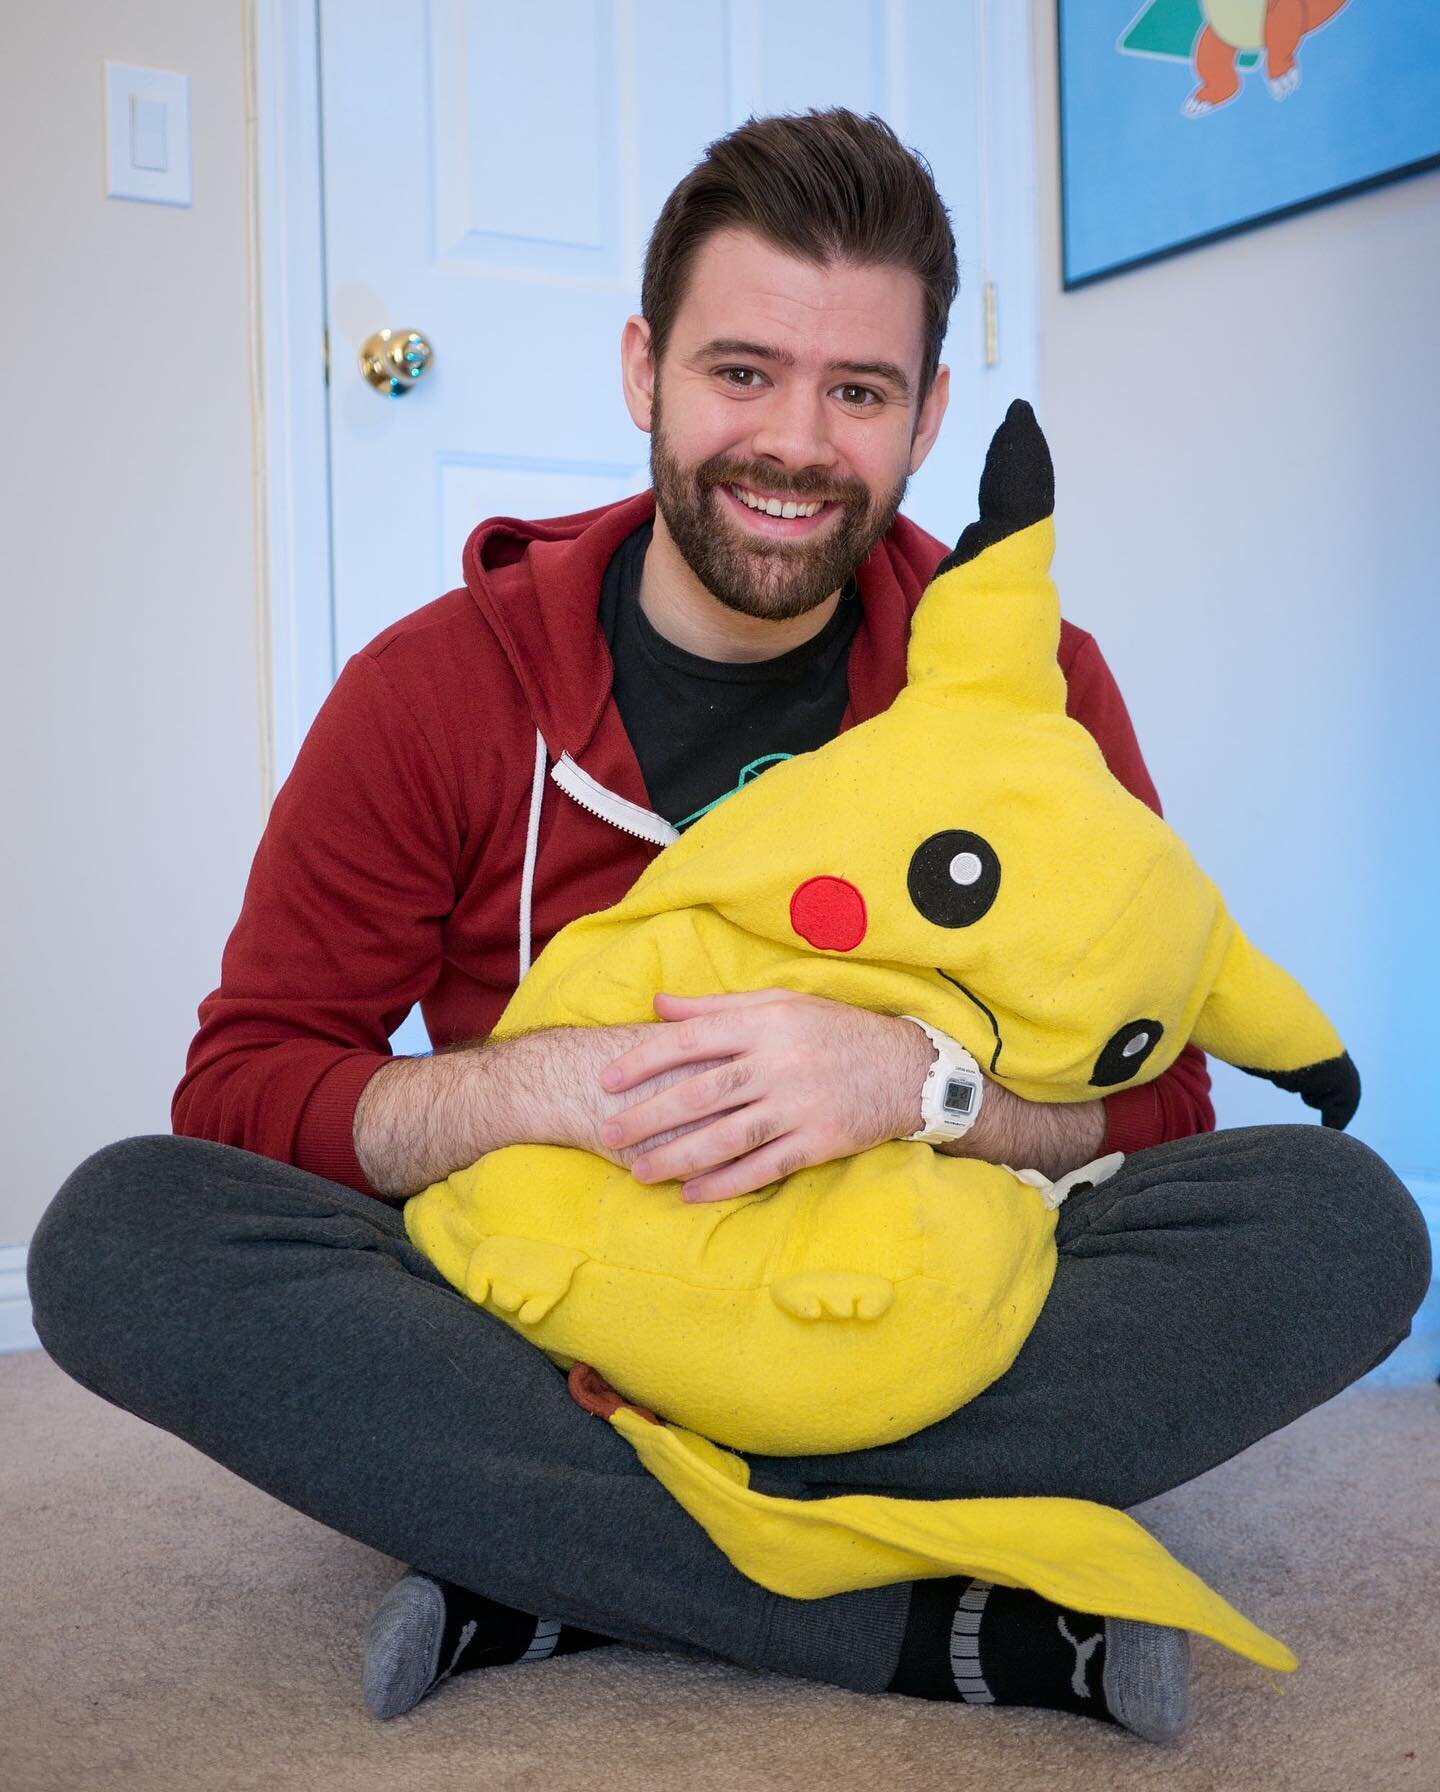 This horribly deflated Pikachu was my main pillow for the better half of my childhood. Happy Pokemon day everyone. #pokemon #pokemonday #pokemon25 #pikachu